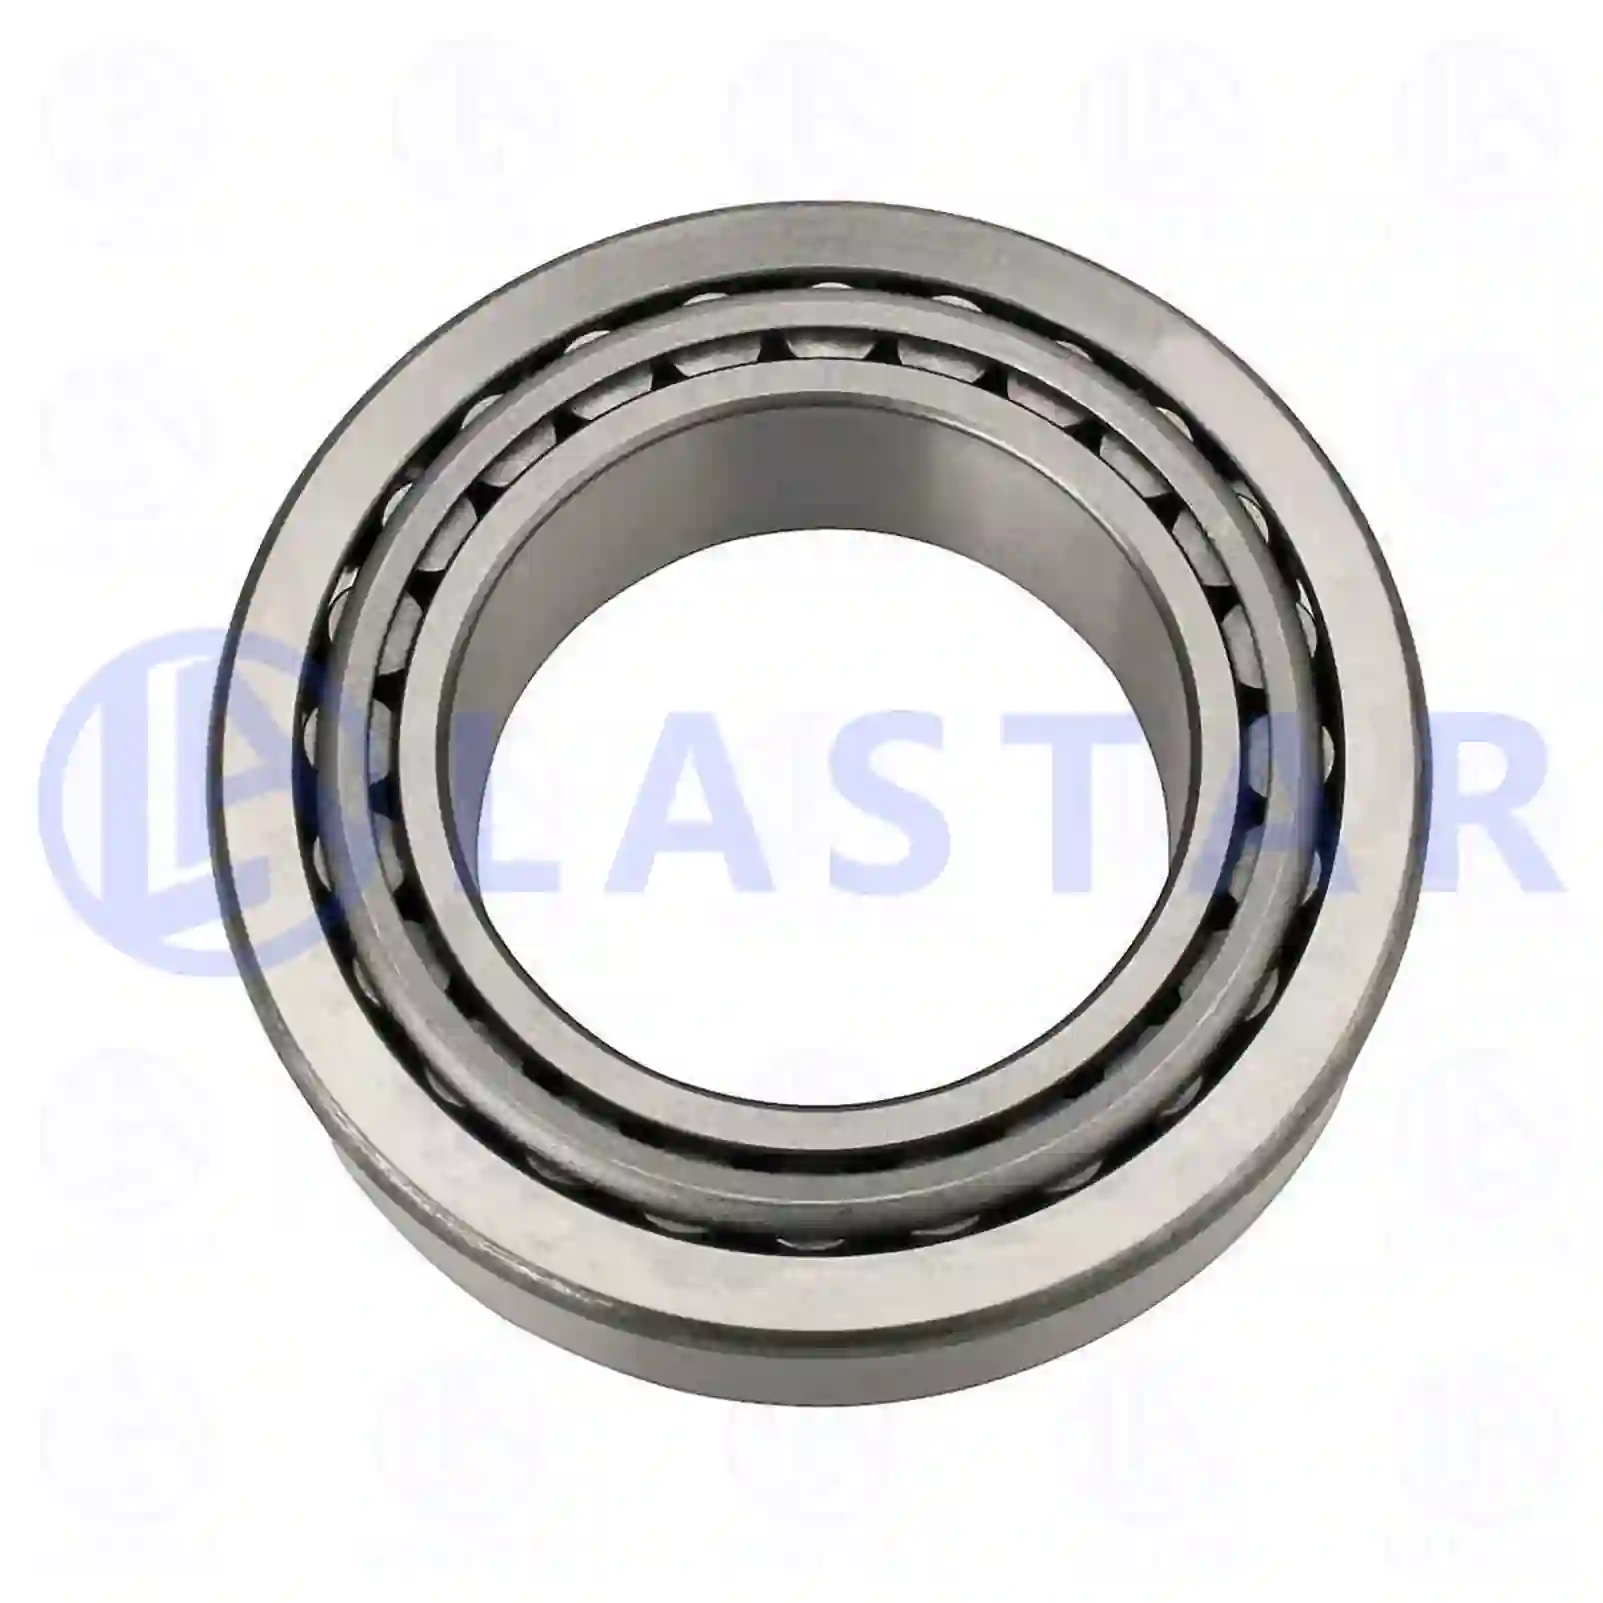 Tapered roller bearing, 77730353, 0221664, 221664, 5000788406, 06324990040, 06324990131, 06324990189, 81934200270, 0009814218, 0039813005, 0039813205, 0089810305, 43210-D930A, 0023433115, 5000788406, 184678, ZG03011-0008 ||  77730353 Lastar Spare Part | Truck Spare Parts, Auotomotive Spare Parts Tapered roller bearing, 77730353, 0221664, 221664, 5000788406, 06324990040, 06324990131, 06324990189, 81934200270, 0009814218, 0039813005, 0039813205, 0089810305, 43210-D930A, 0023433115, 5000788406, 184678, ZG03011-0008 ||  77730353 Lastar Spare Part | Truck Spare Parts, Auotomotive Spare Parts